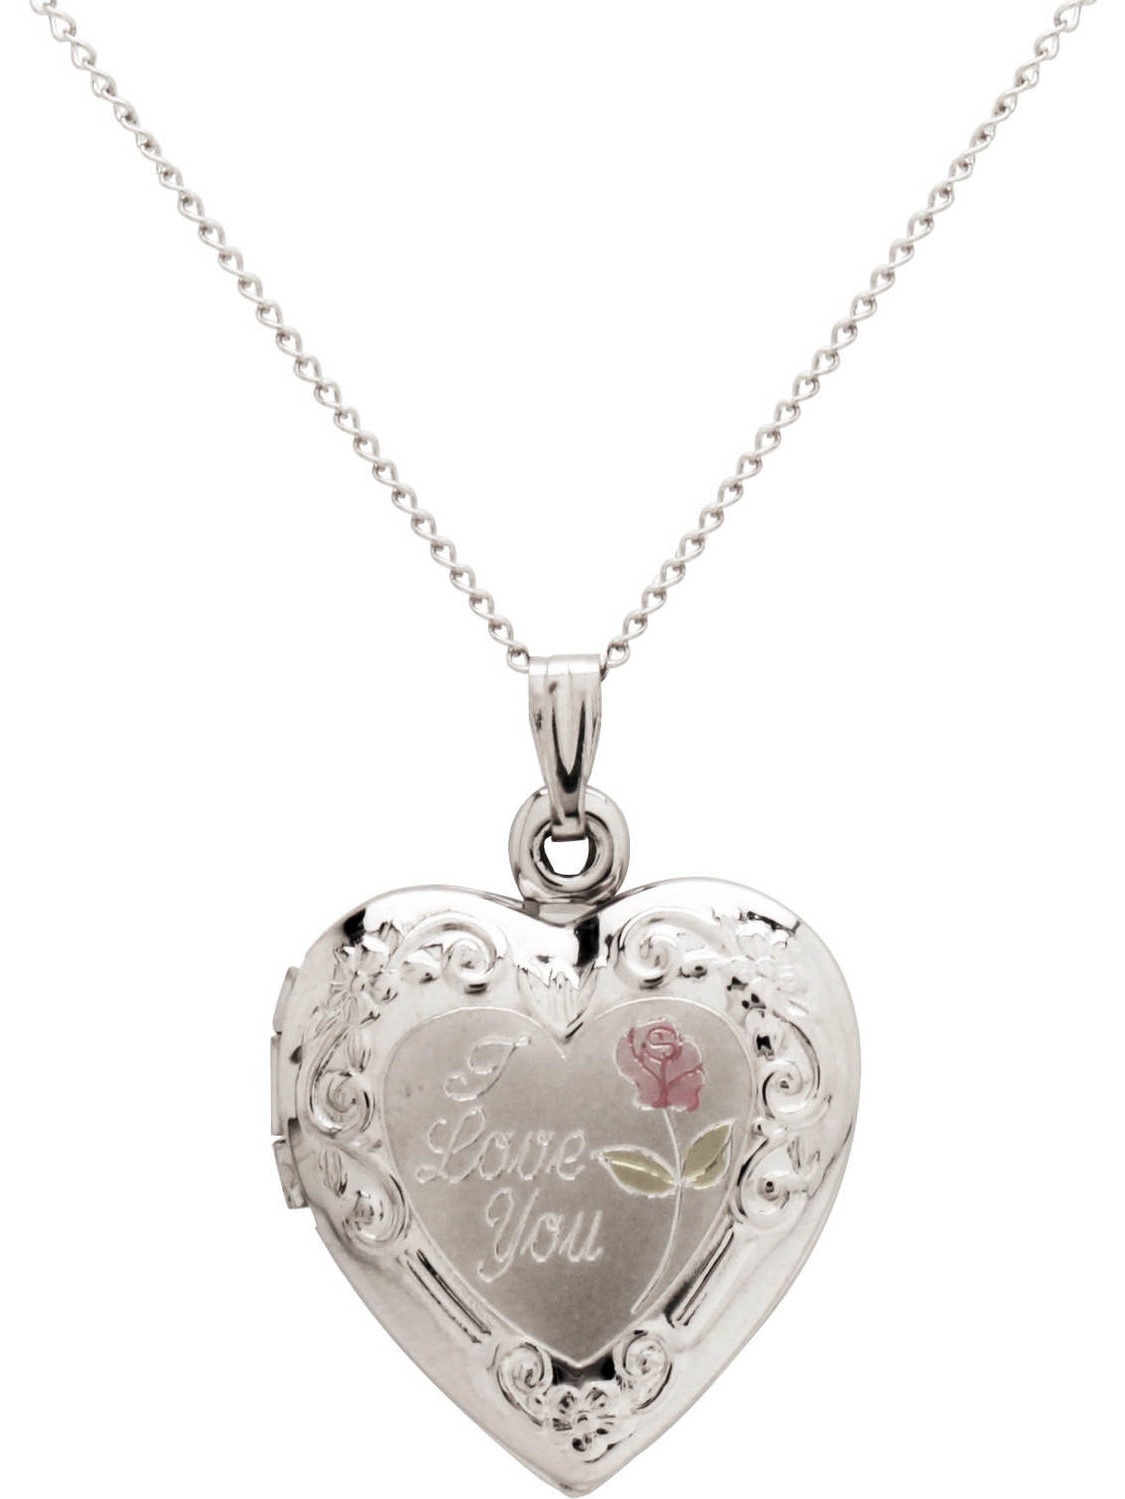 DEMDACO Forever in My Heart Cardinal Locket Silver Plated 18" Pendant Necklace